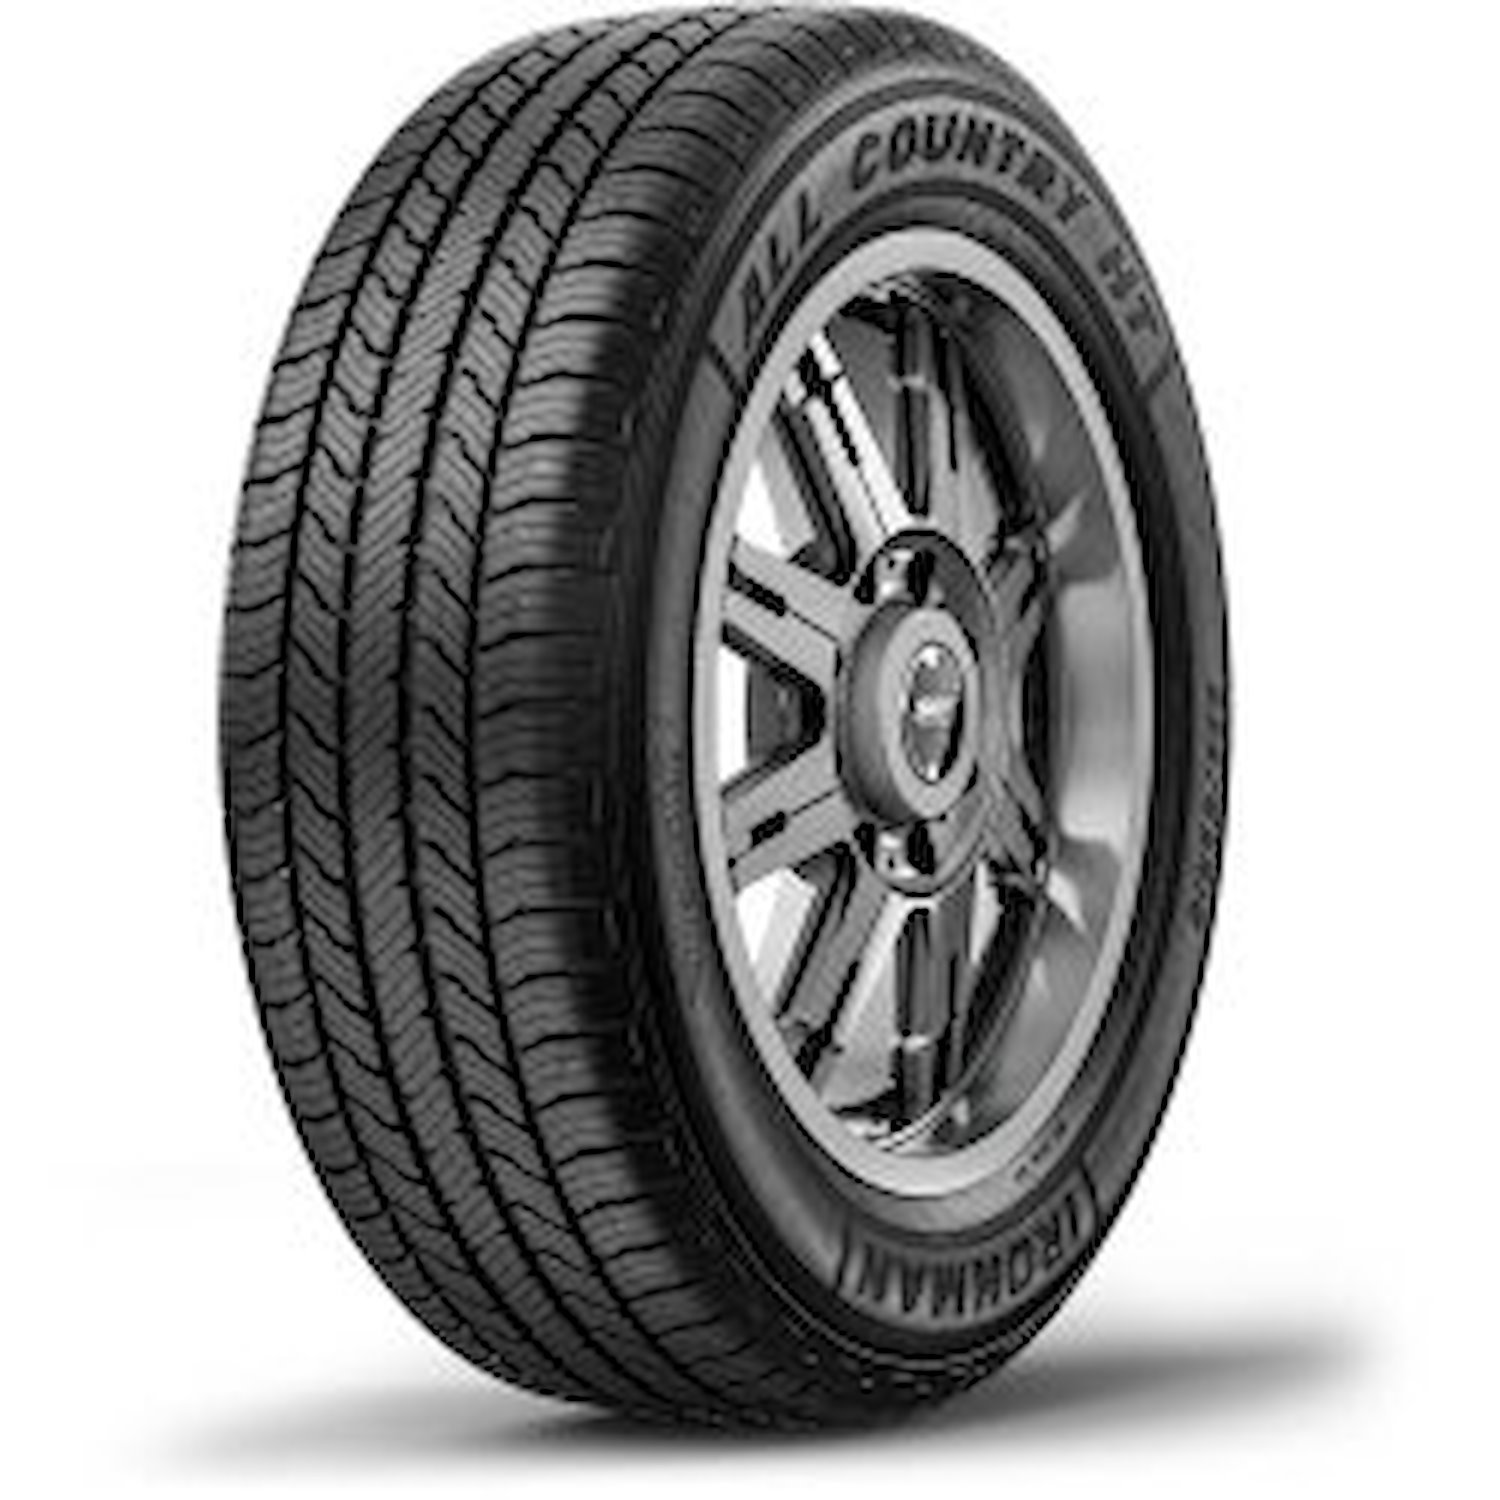 03057 All Country HT Tire, 255/65R18, 111T